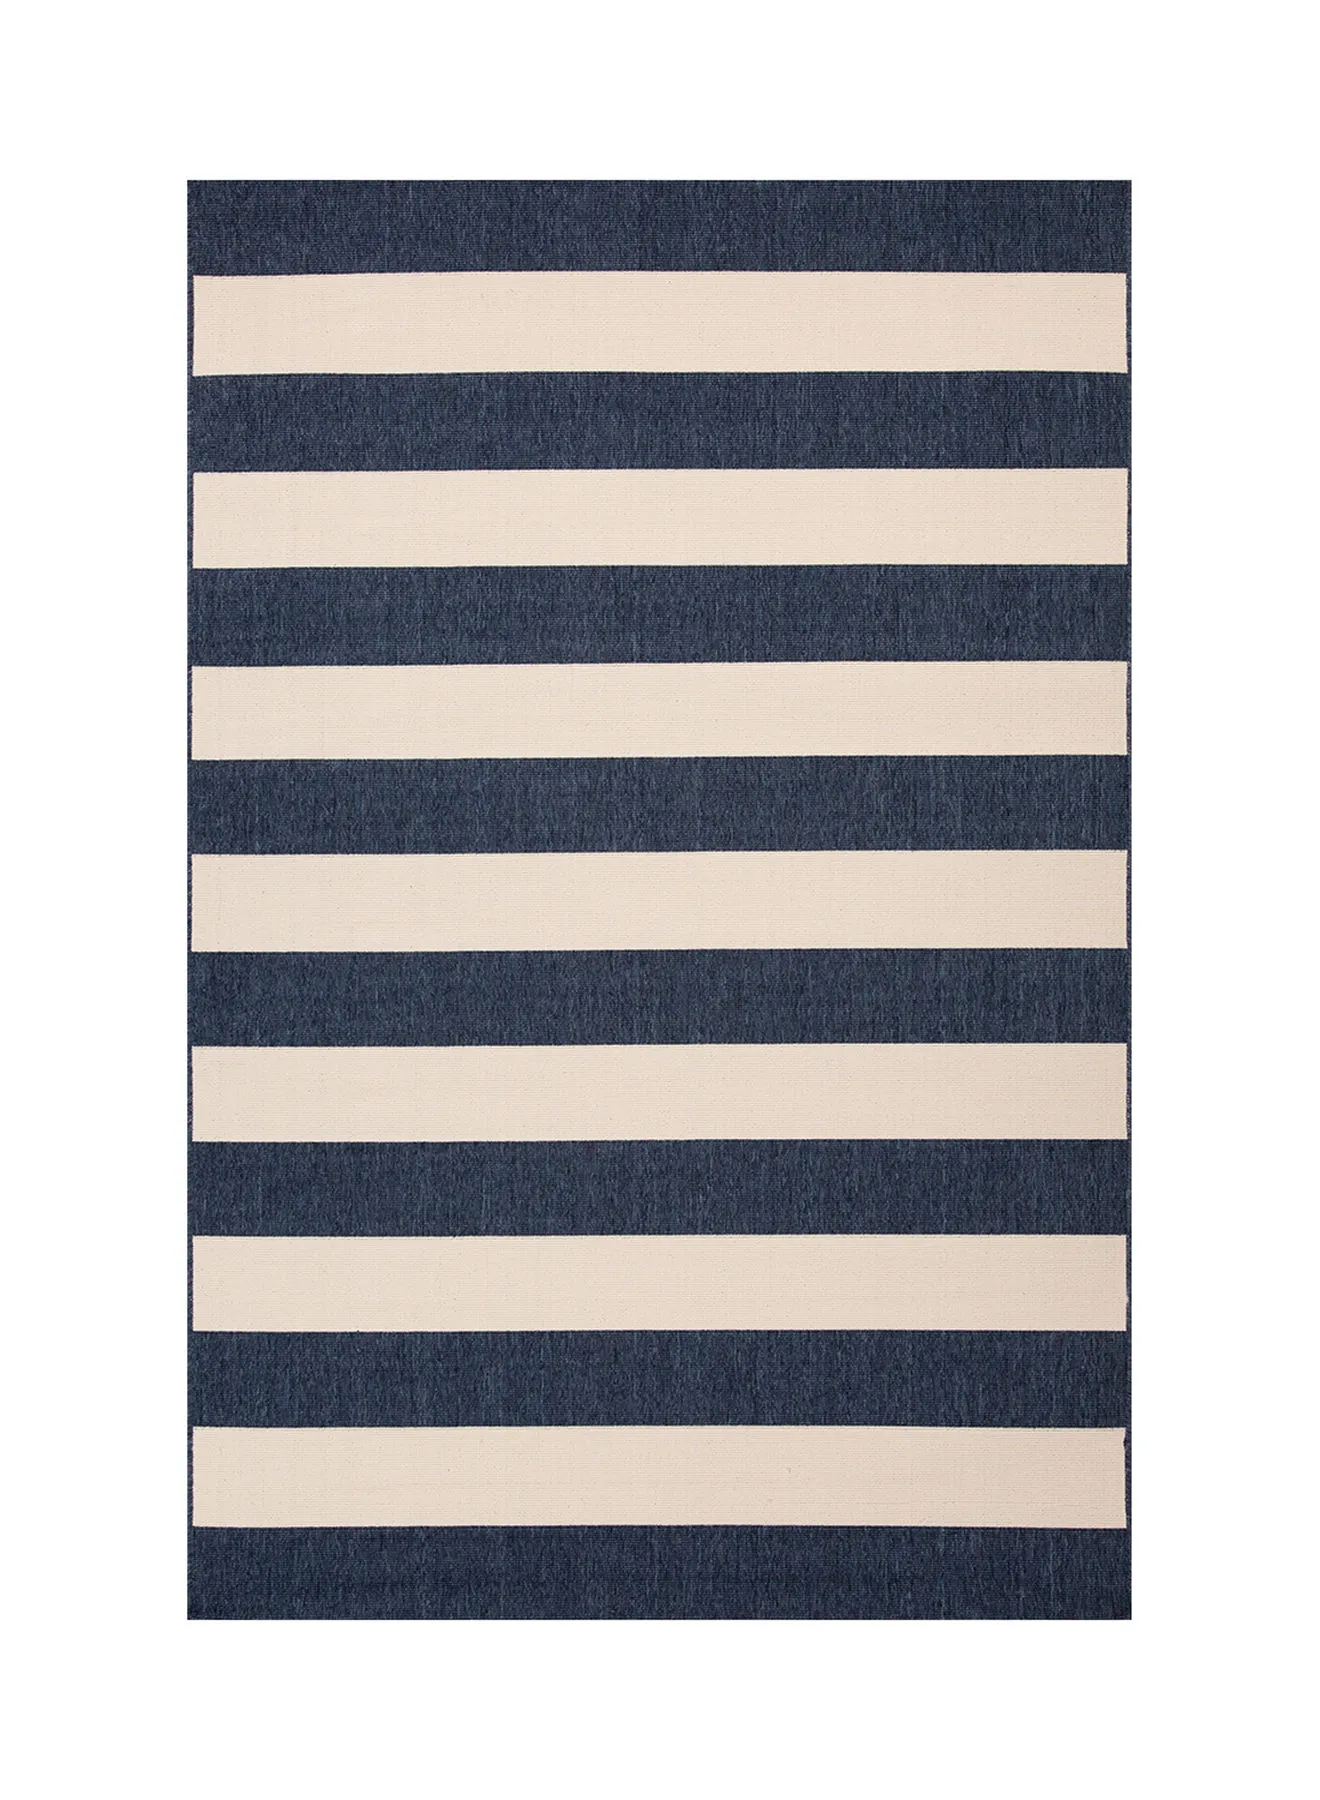 ebb & flow L. Tributary Outdoor Unique Luxury Quality Material Carpet For The Perfect Stylish Home 4465B Blue/White 240 x 340cm